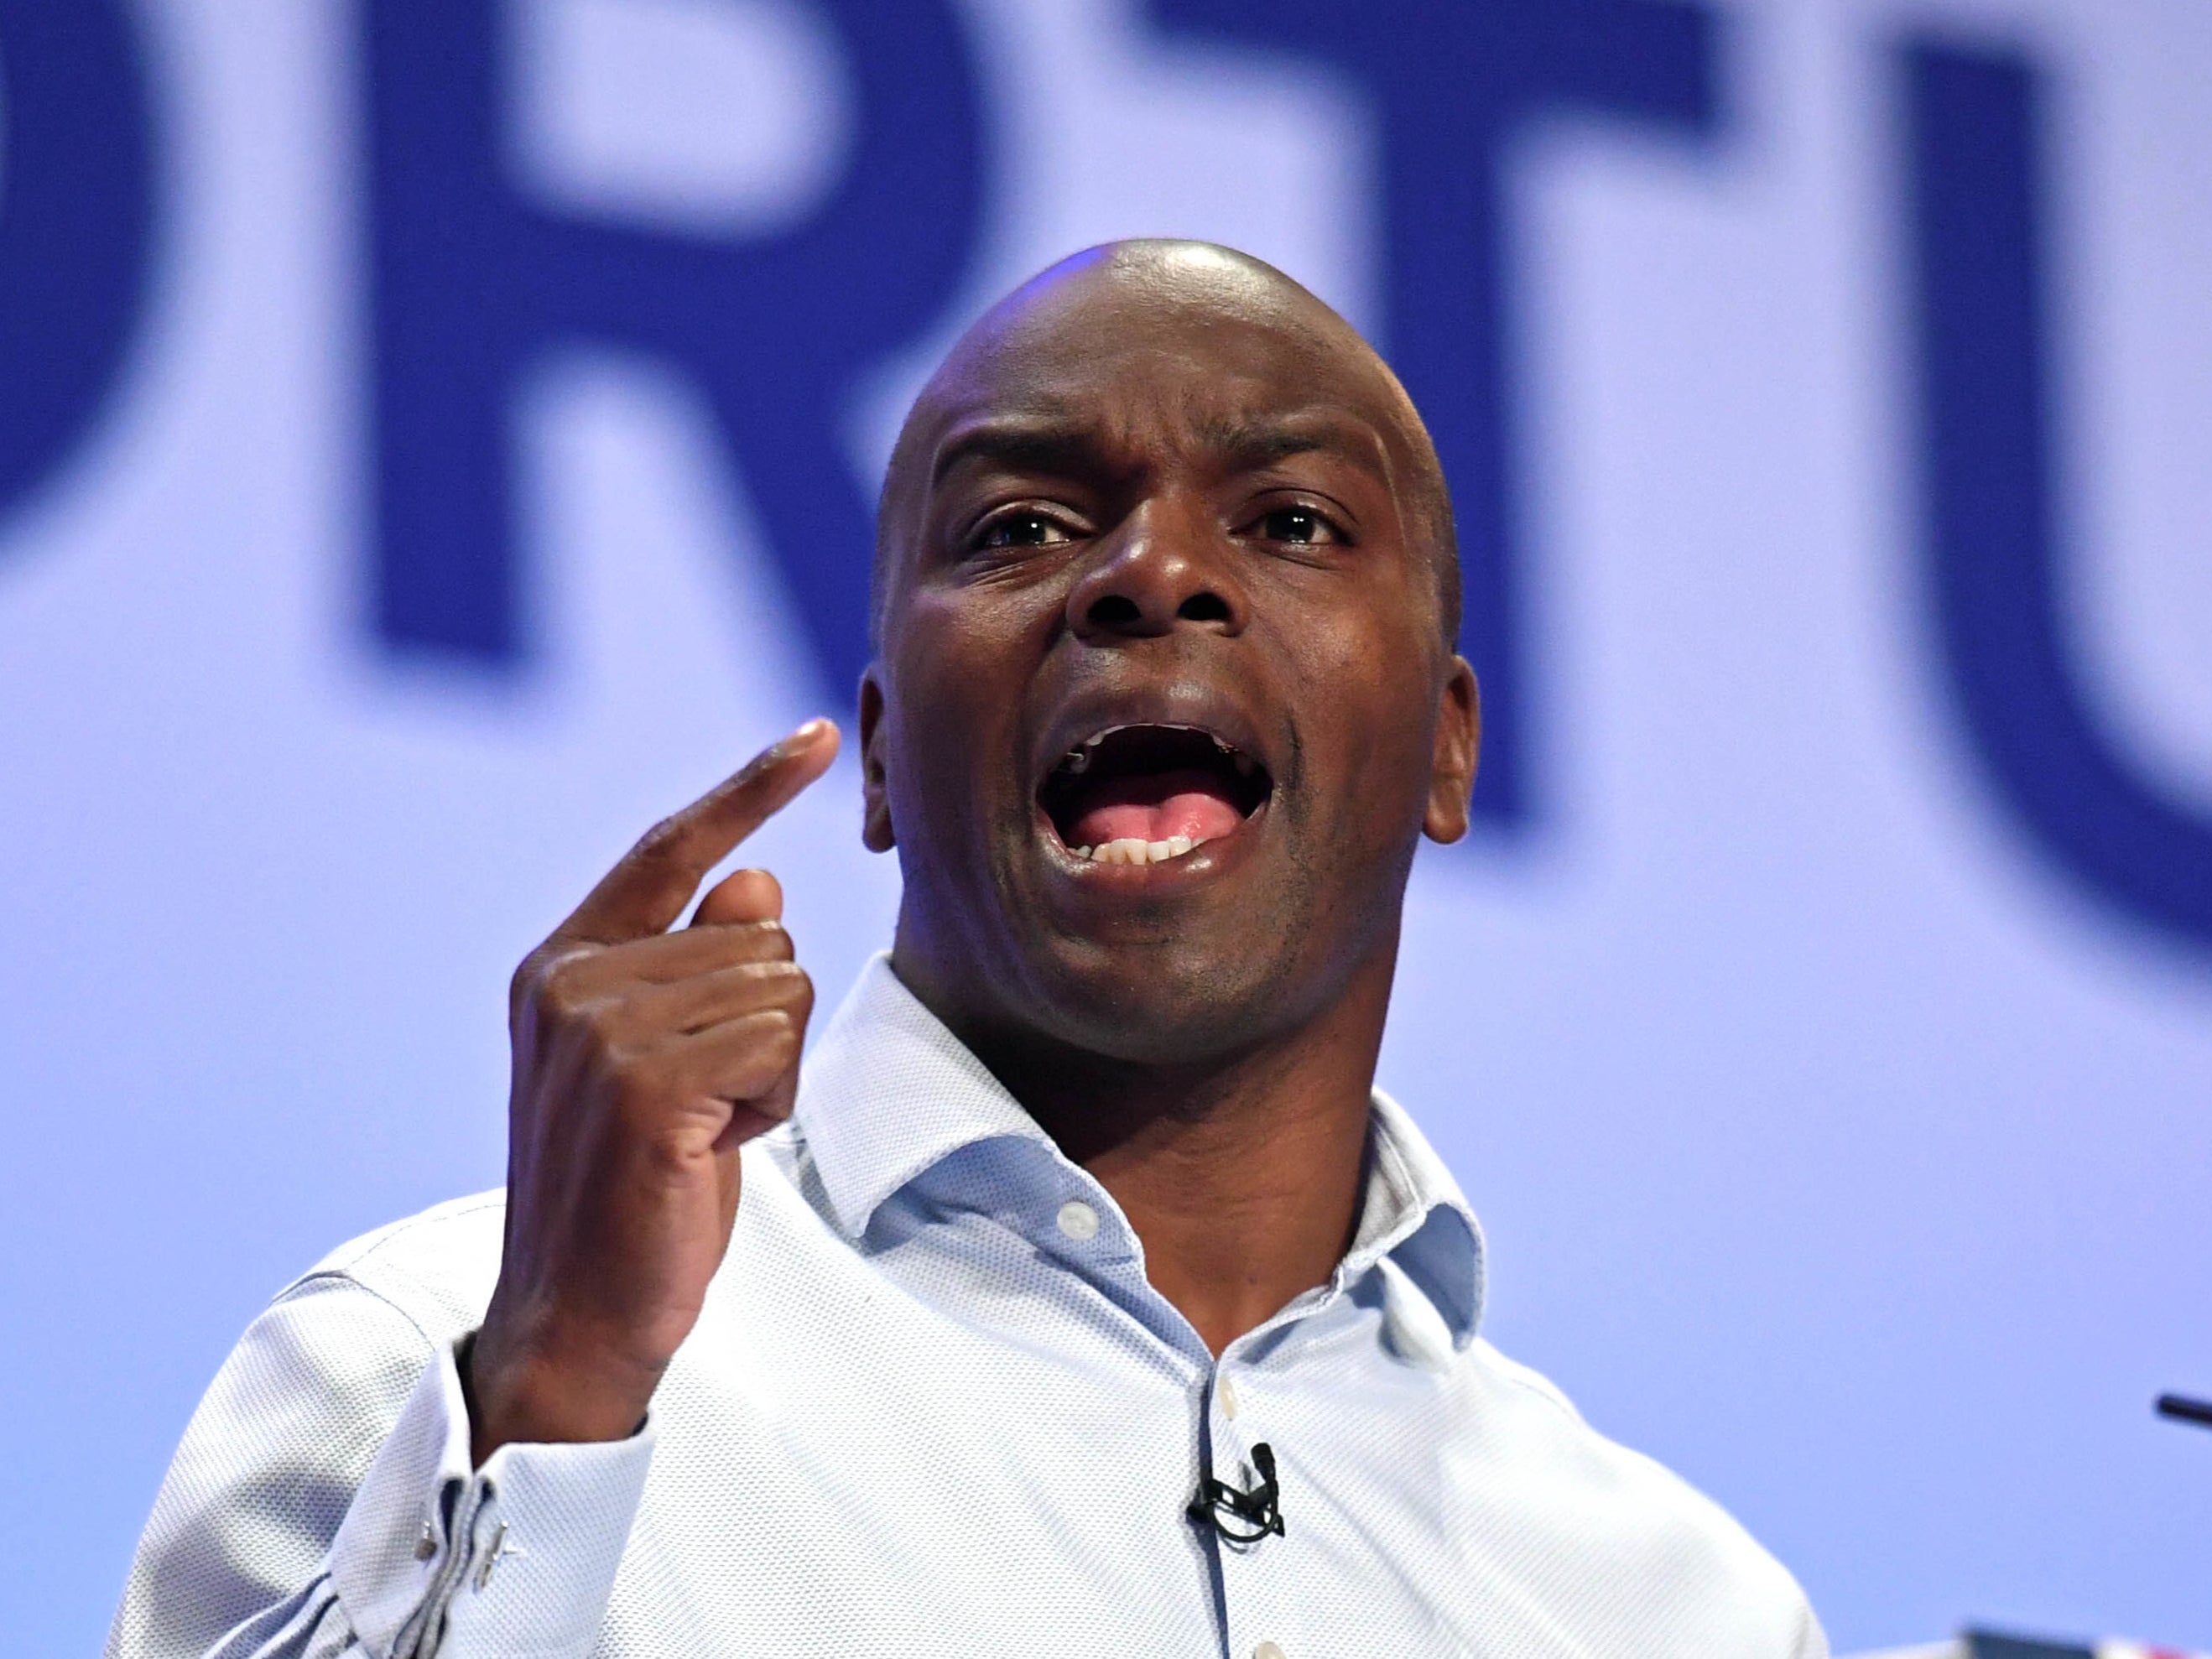 Former Tory mayoral candidate Shaun Bailey